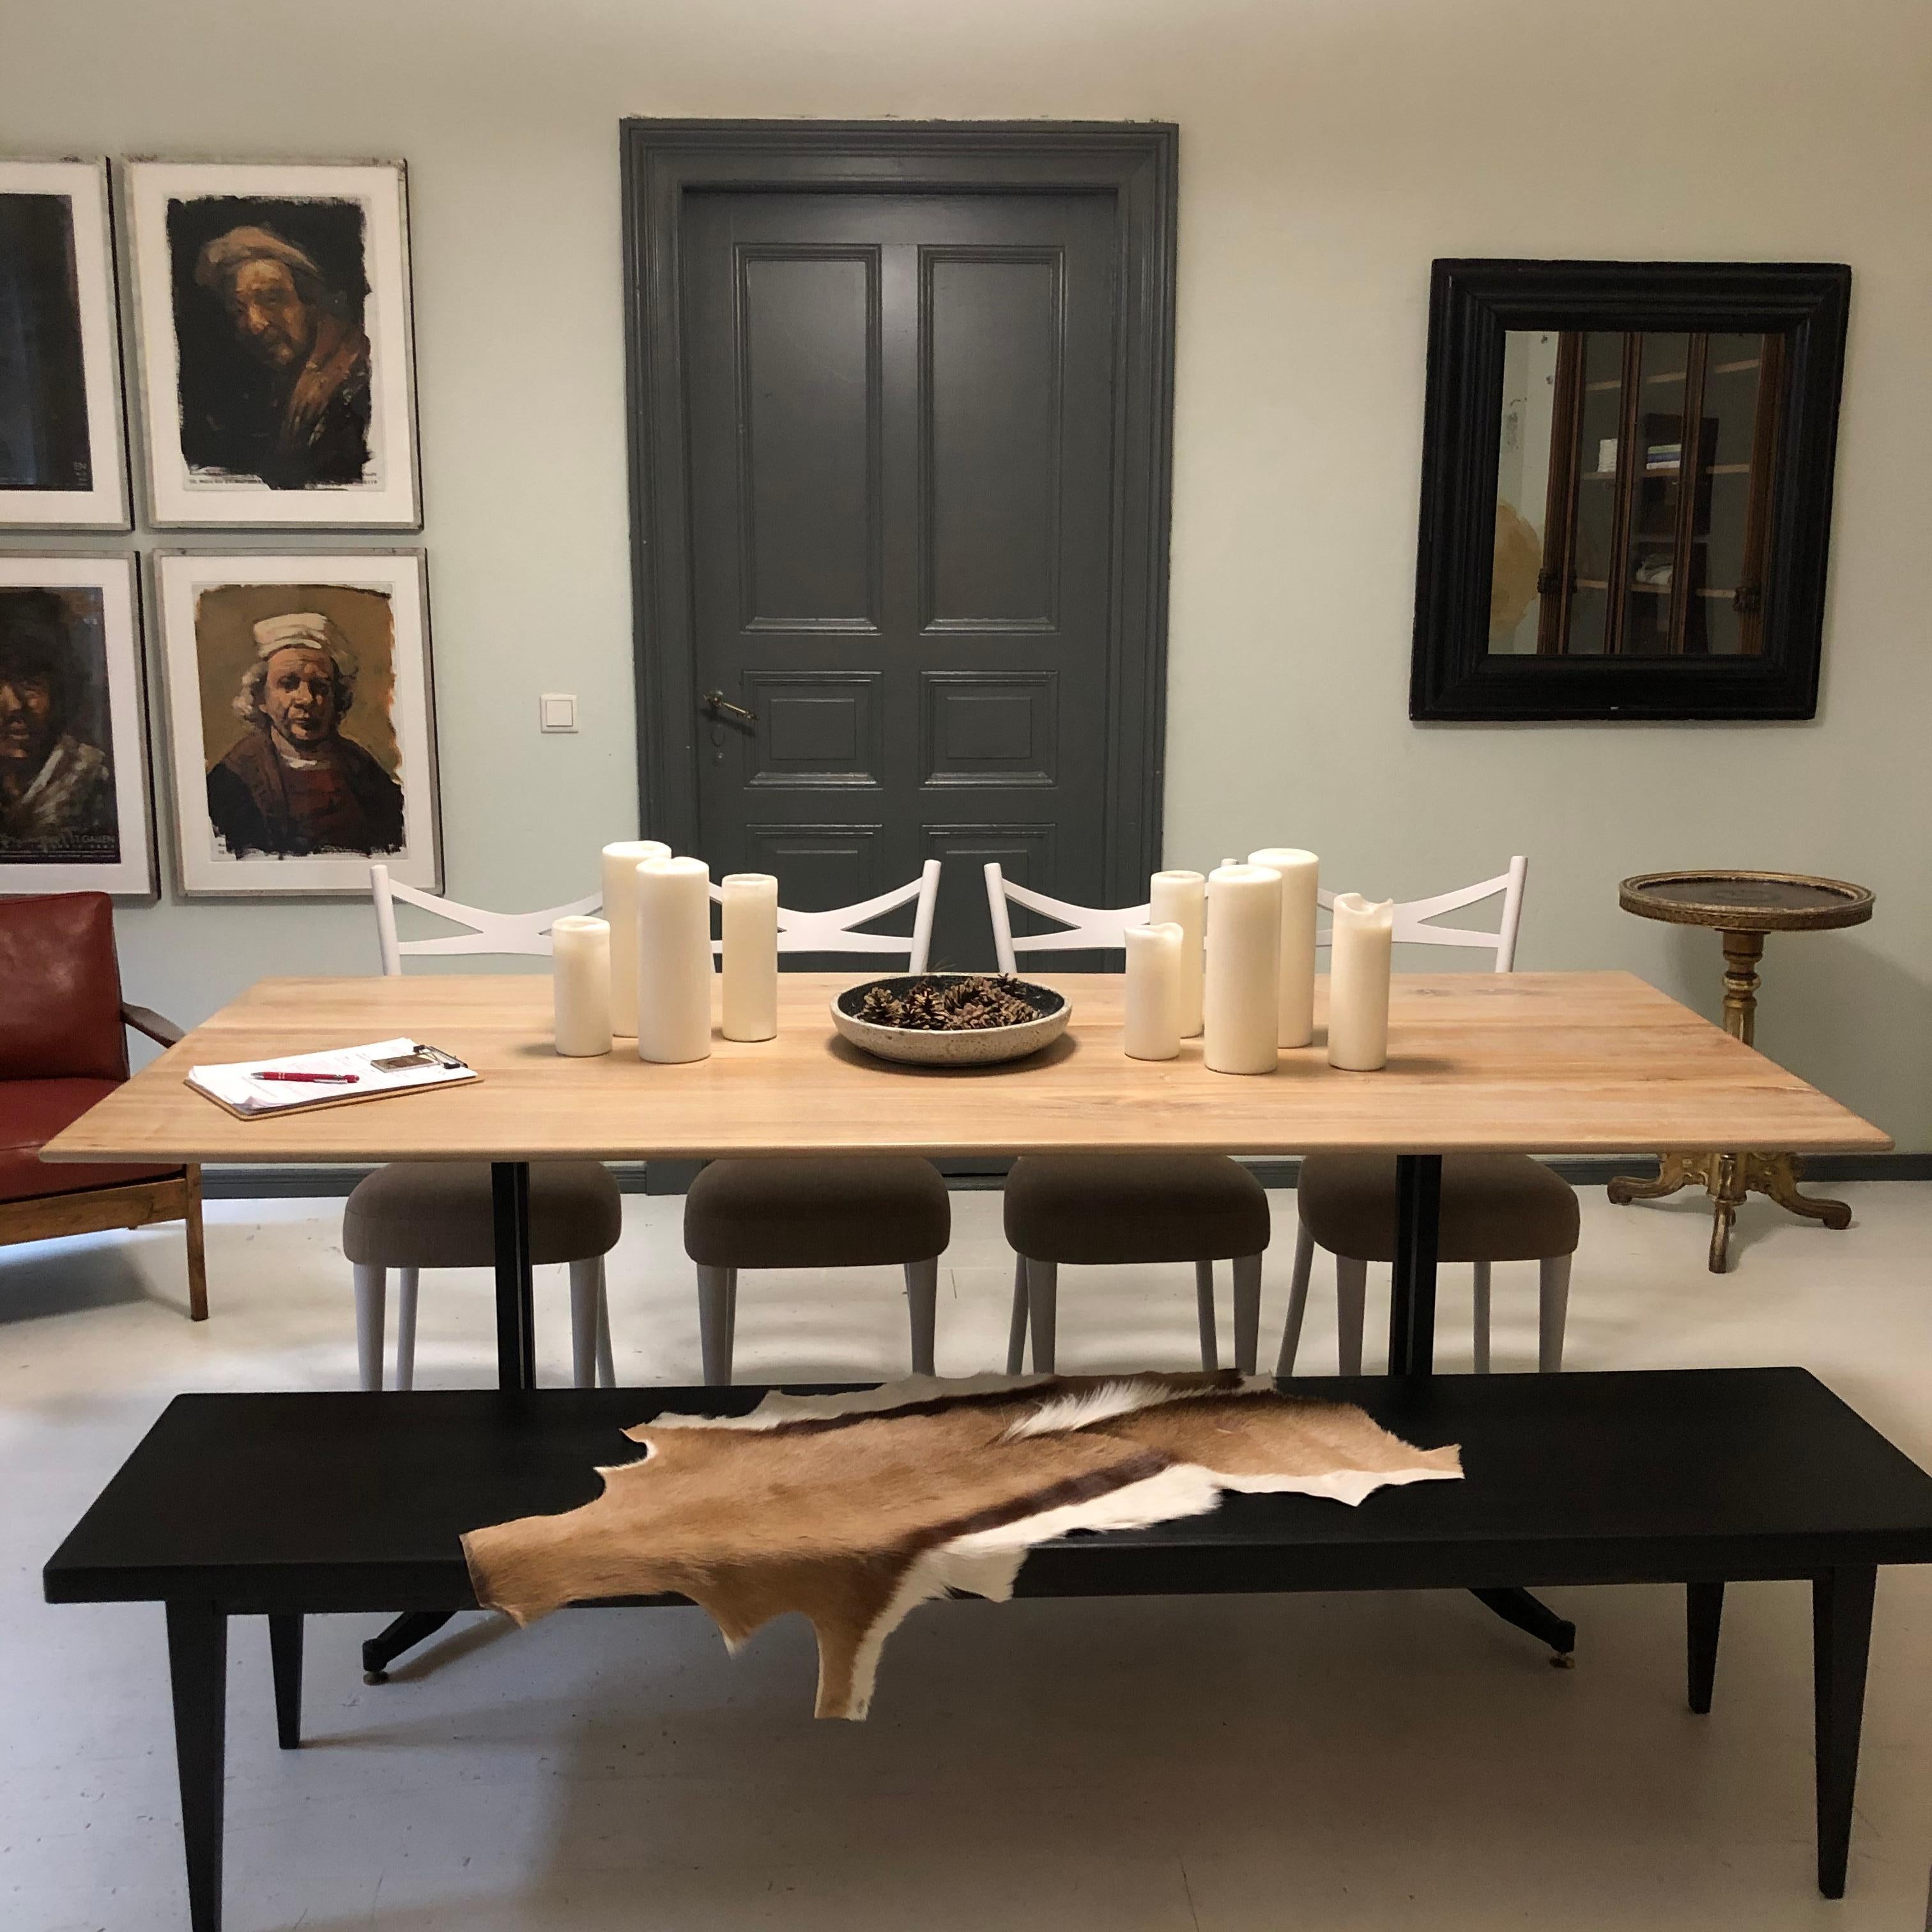 This beautiful midcentury Italian dining table has an elegant black lacquered metal base and the limed elm top is made out of old church benches.

A unique piece which is a great eye-catcher for your antique, modern, space age or mid-century